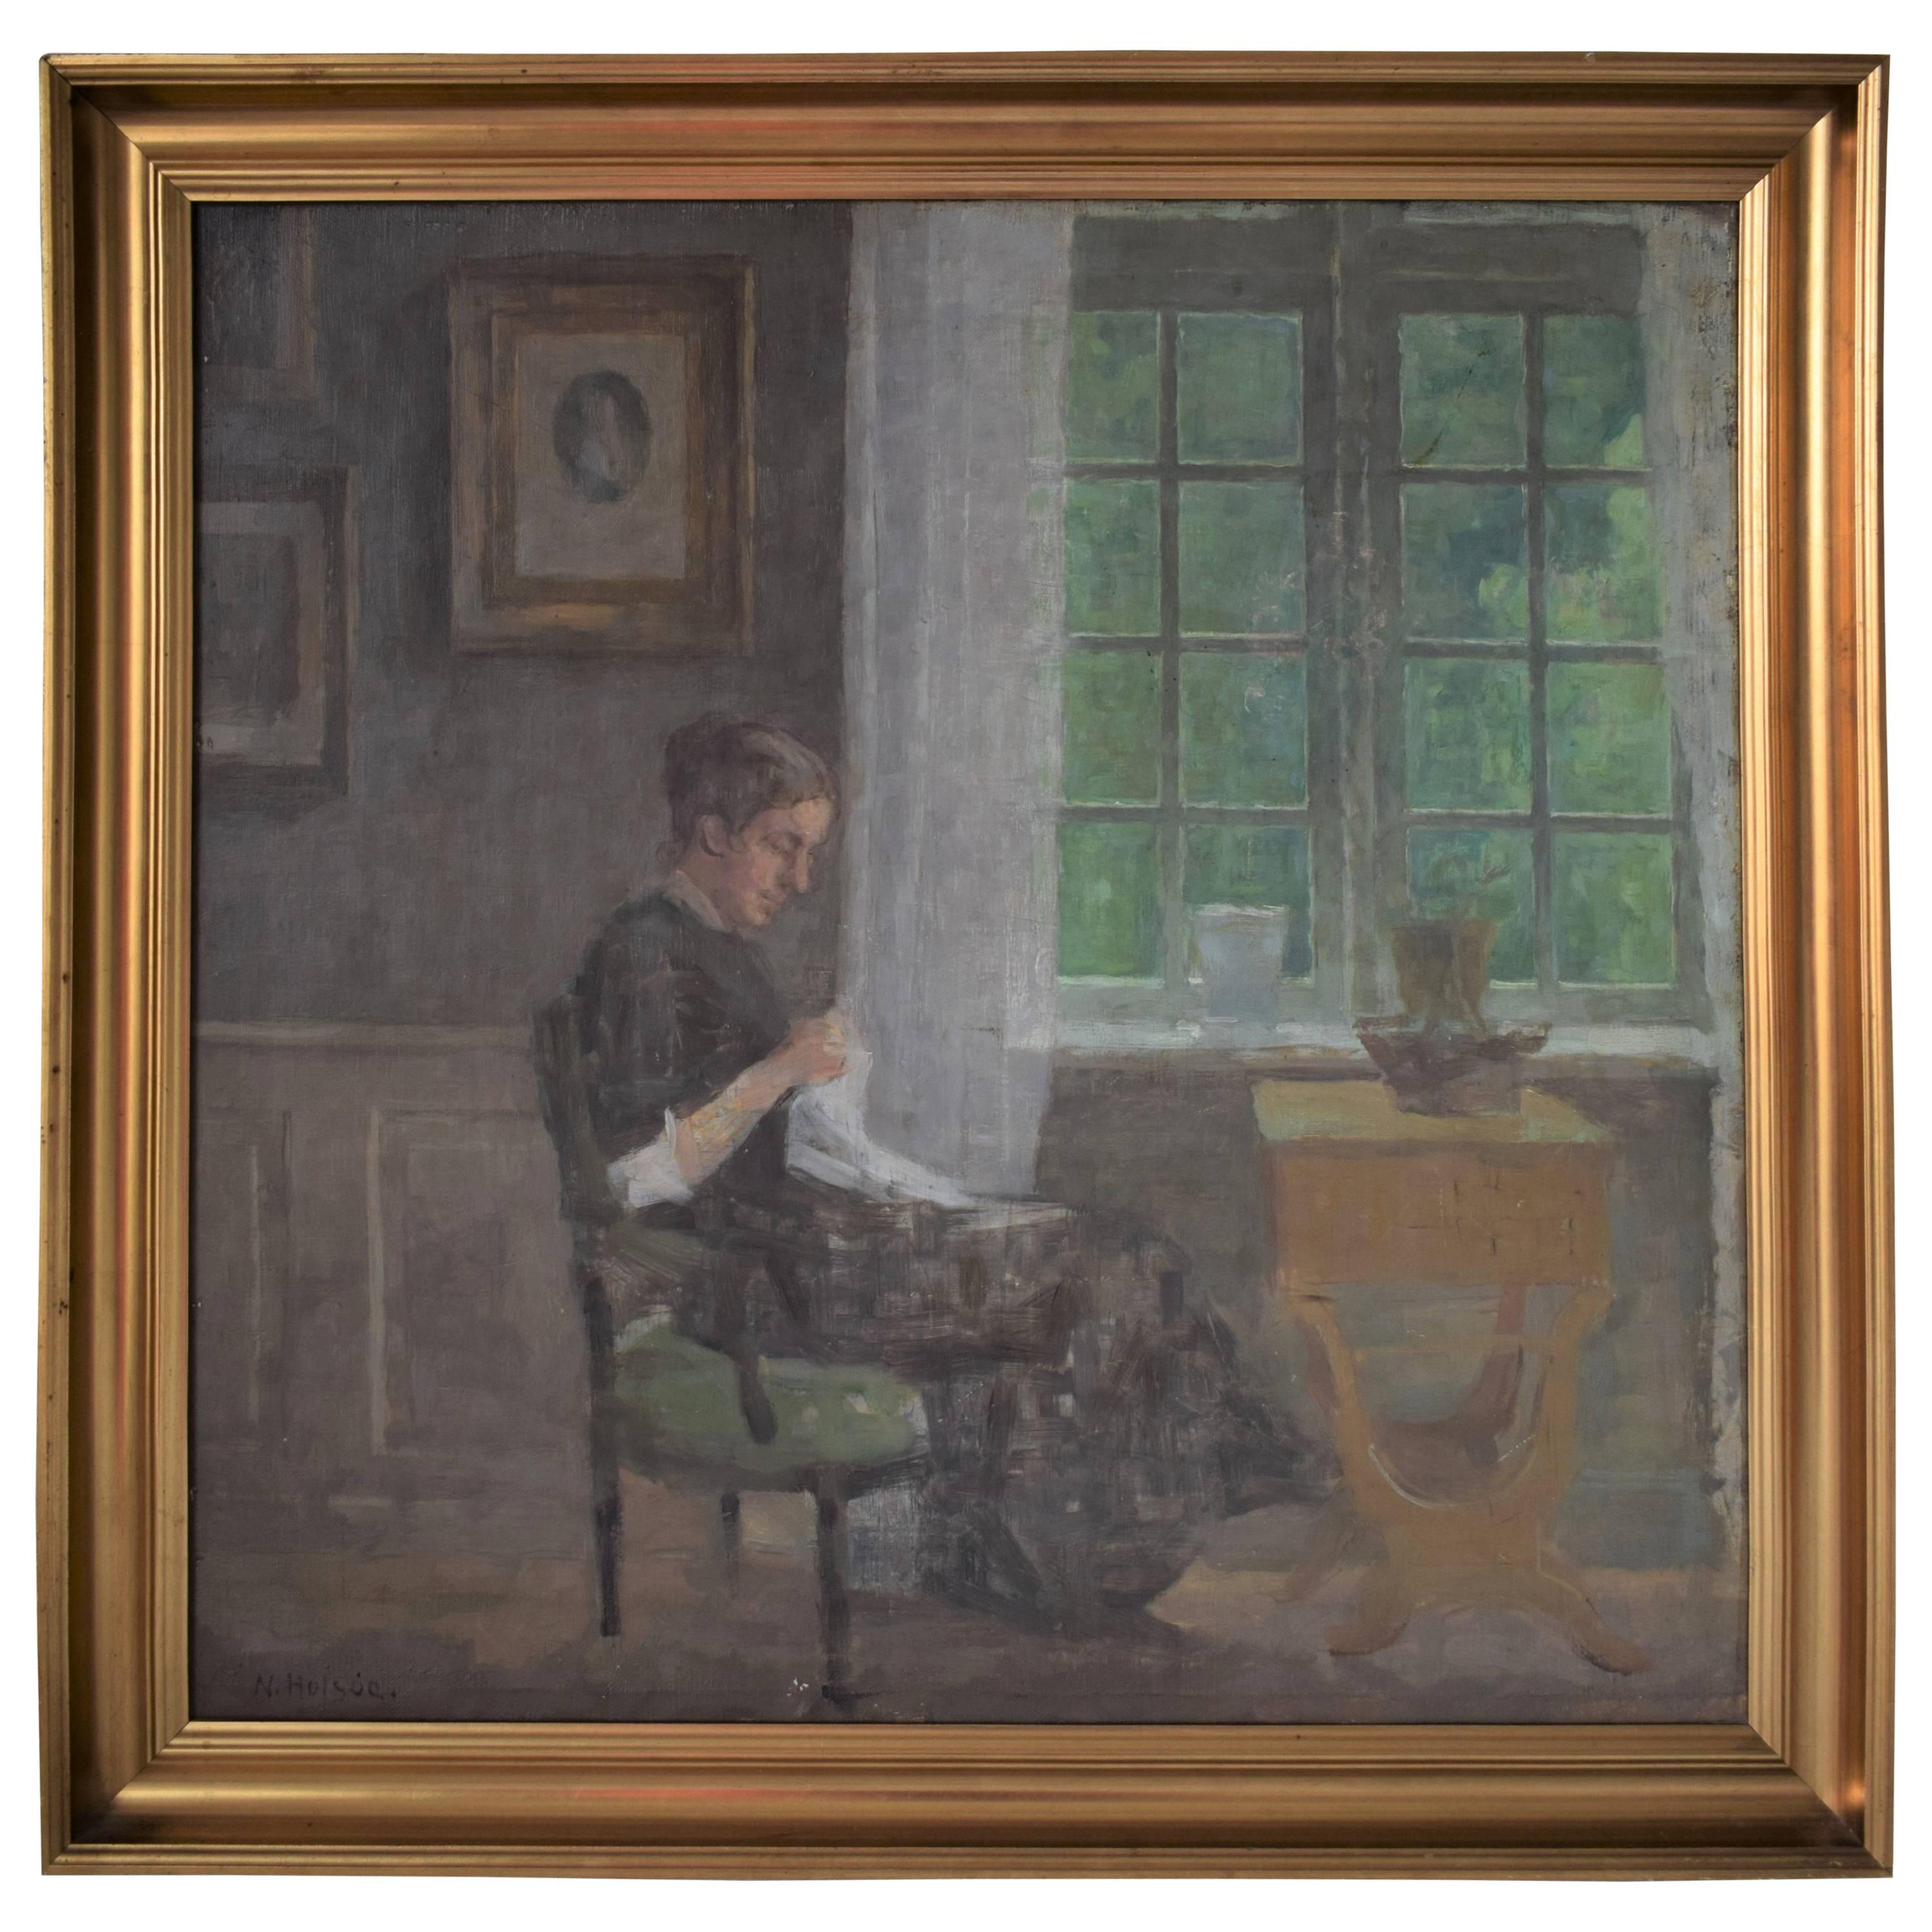 Interior with Sewing Woman by the Window, Niels Holsøe, circa 1920